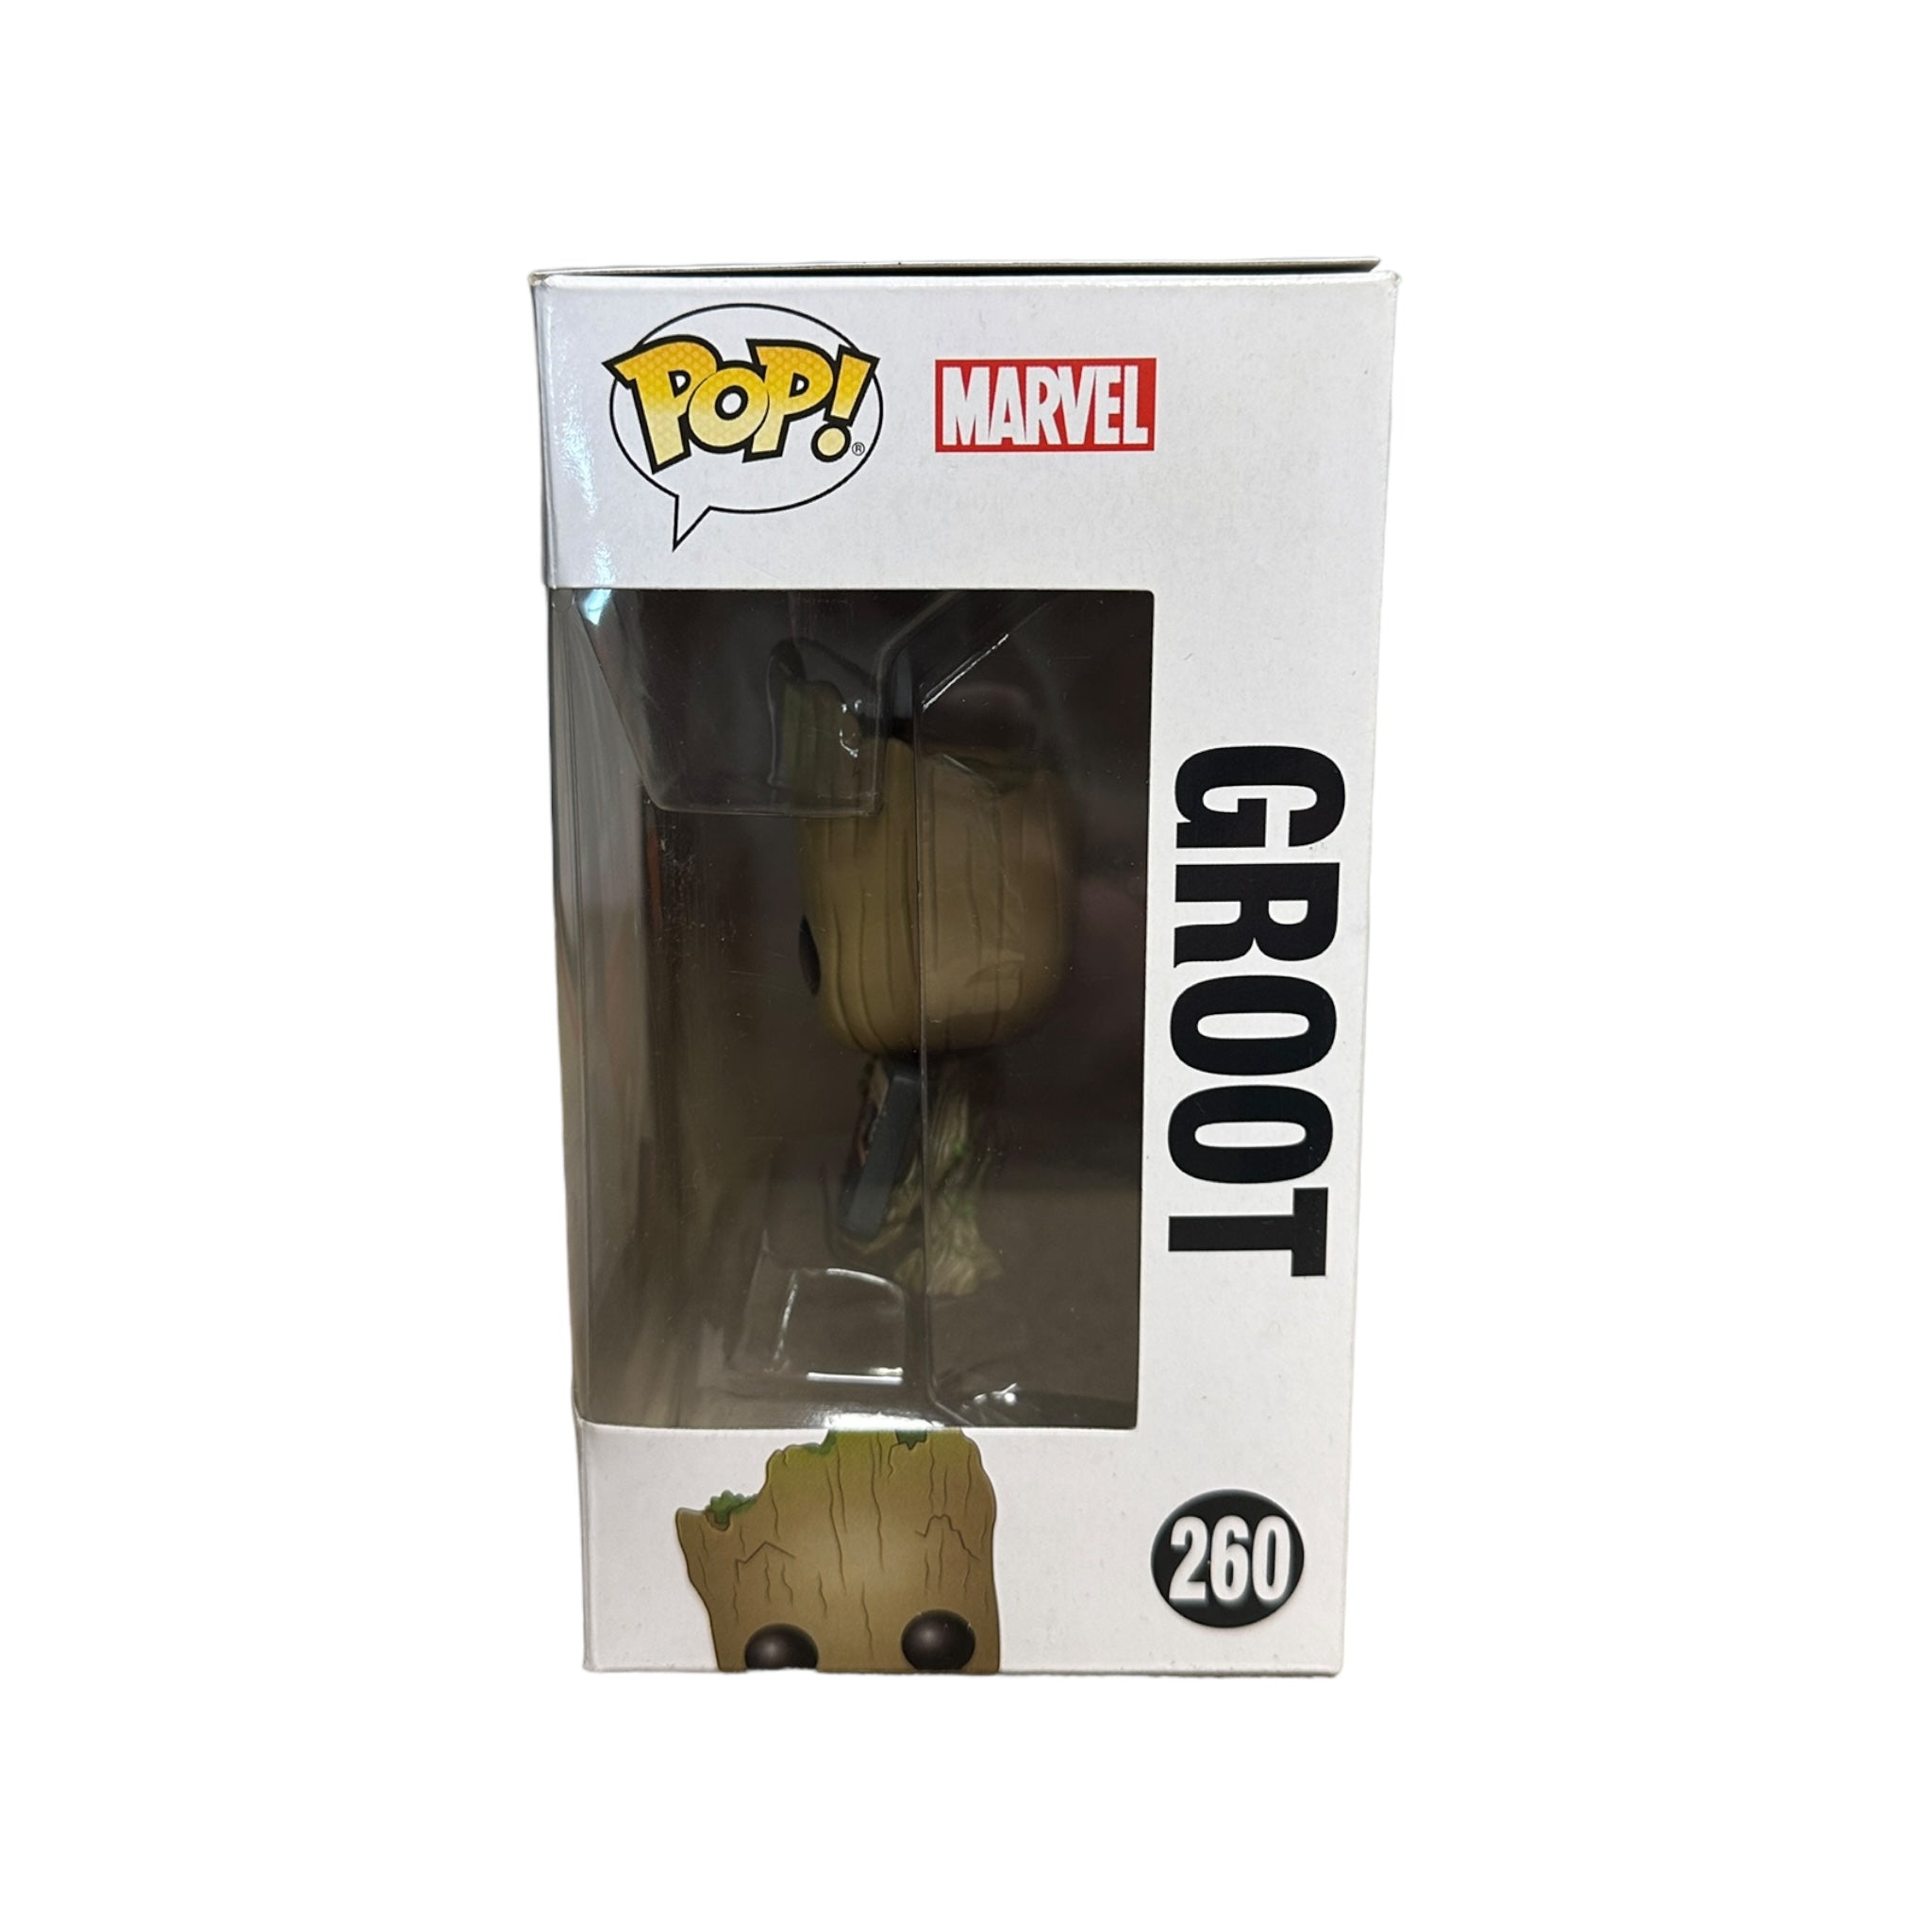 Groot #260 (w/ Mixtape) Funko Pop! - Guardians of The Galaxy Vol. 2 - Marvel Collector Corps Exclusive - Condition 7.5/10